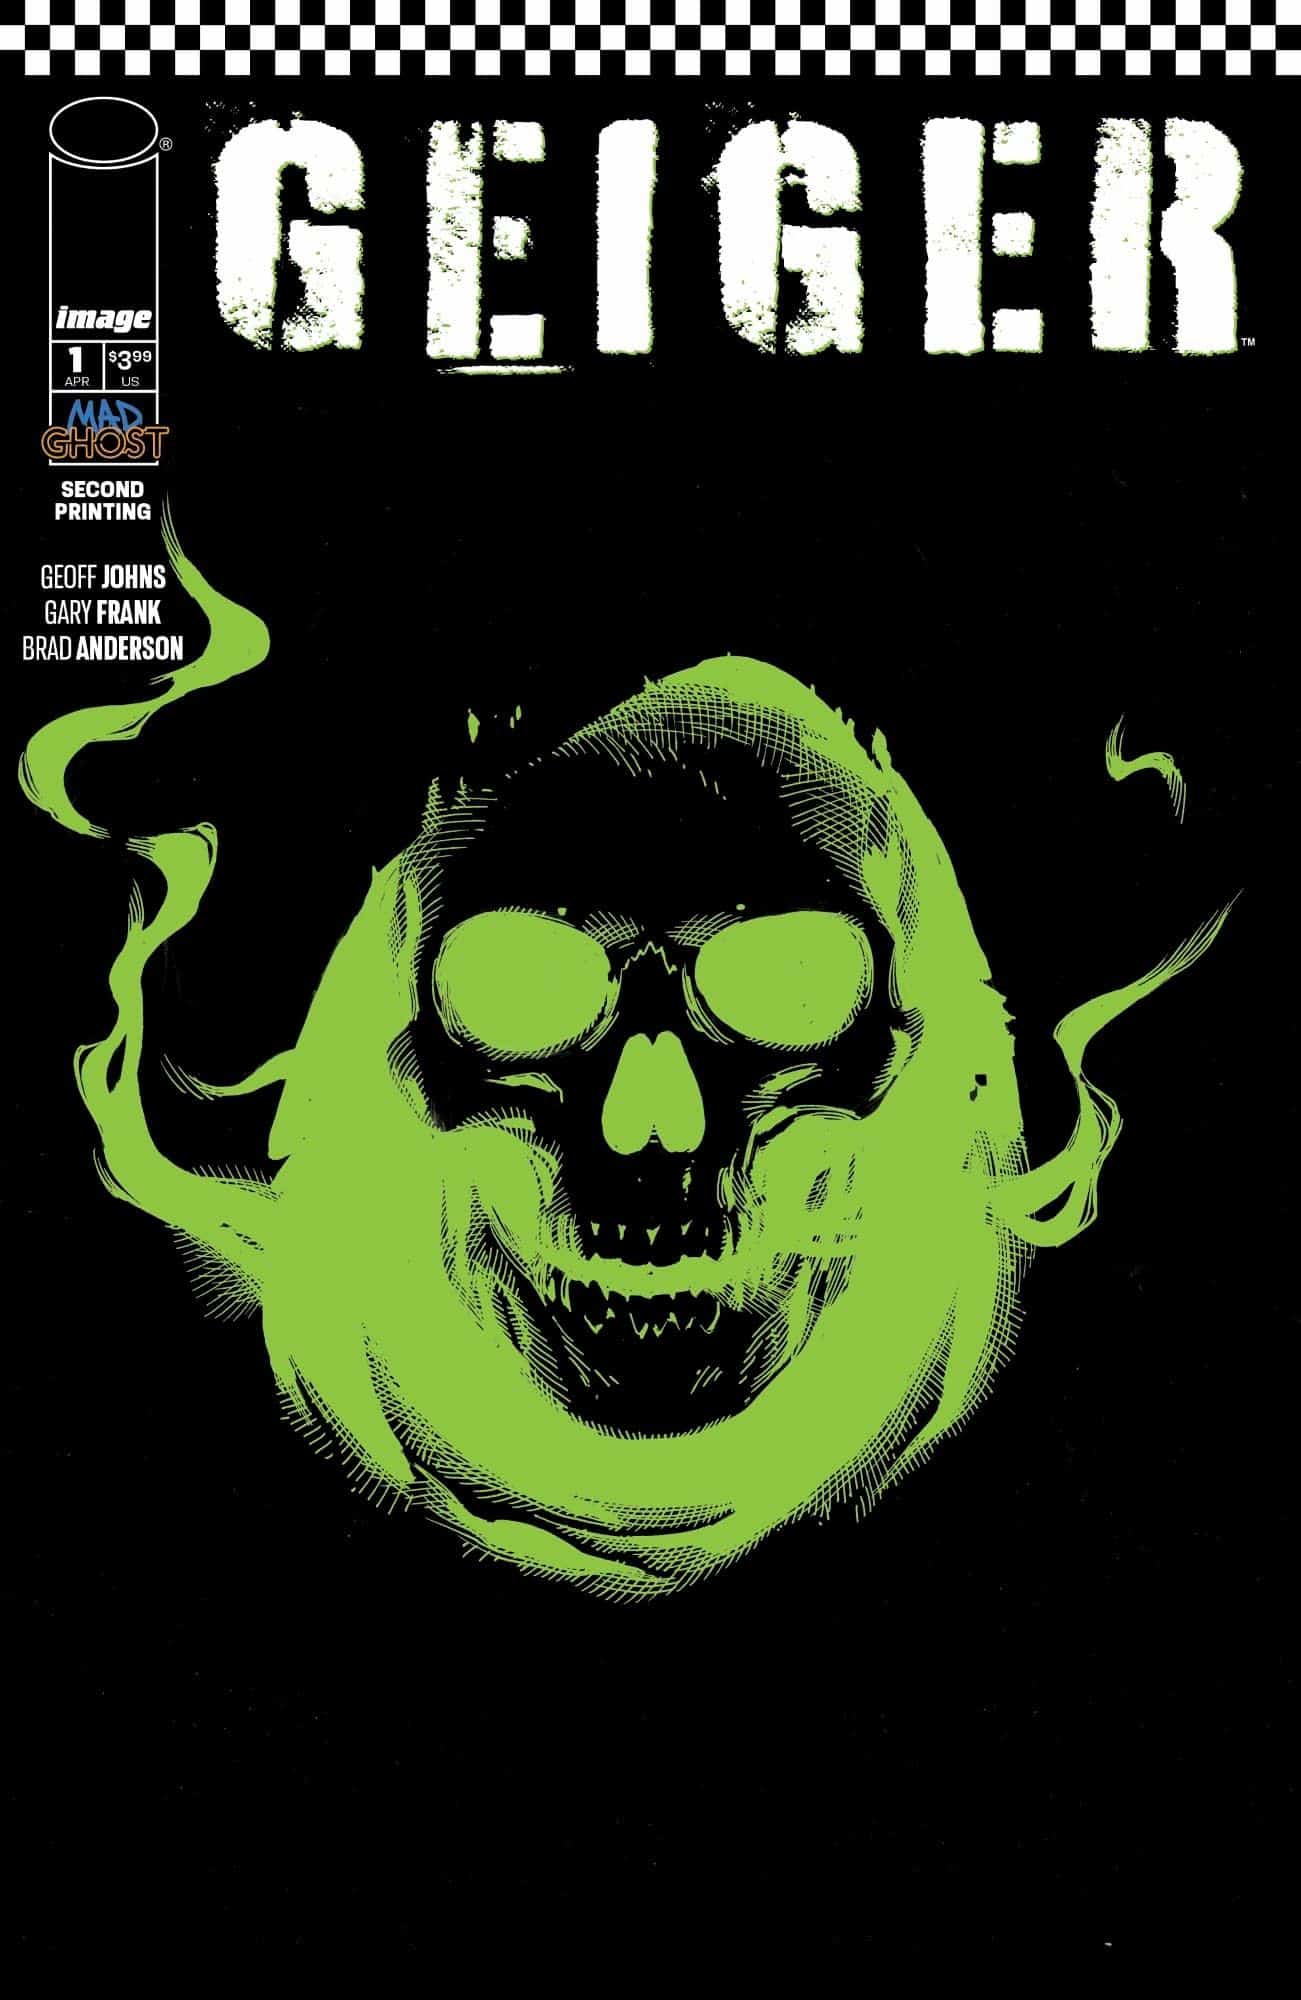 Image Comics’ Geiger #1 From DC Comics Doomsday Clock Creative Team Sells Out Before Release With 2nd Print Announced!